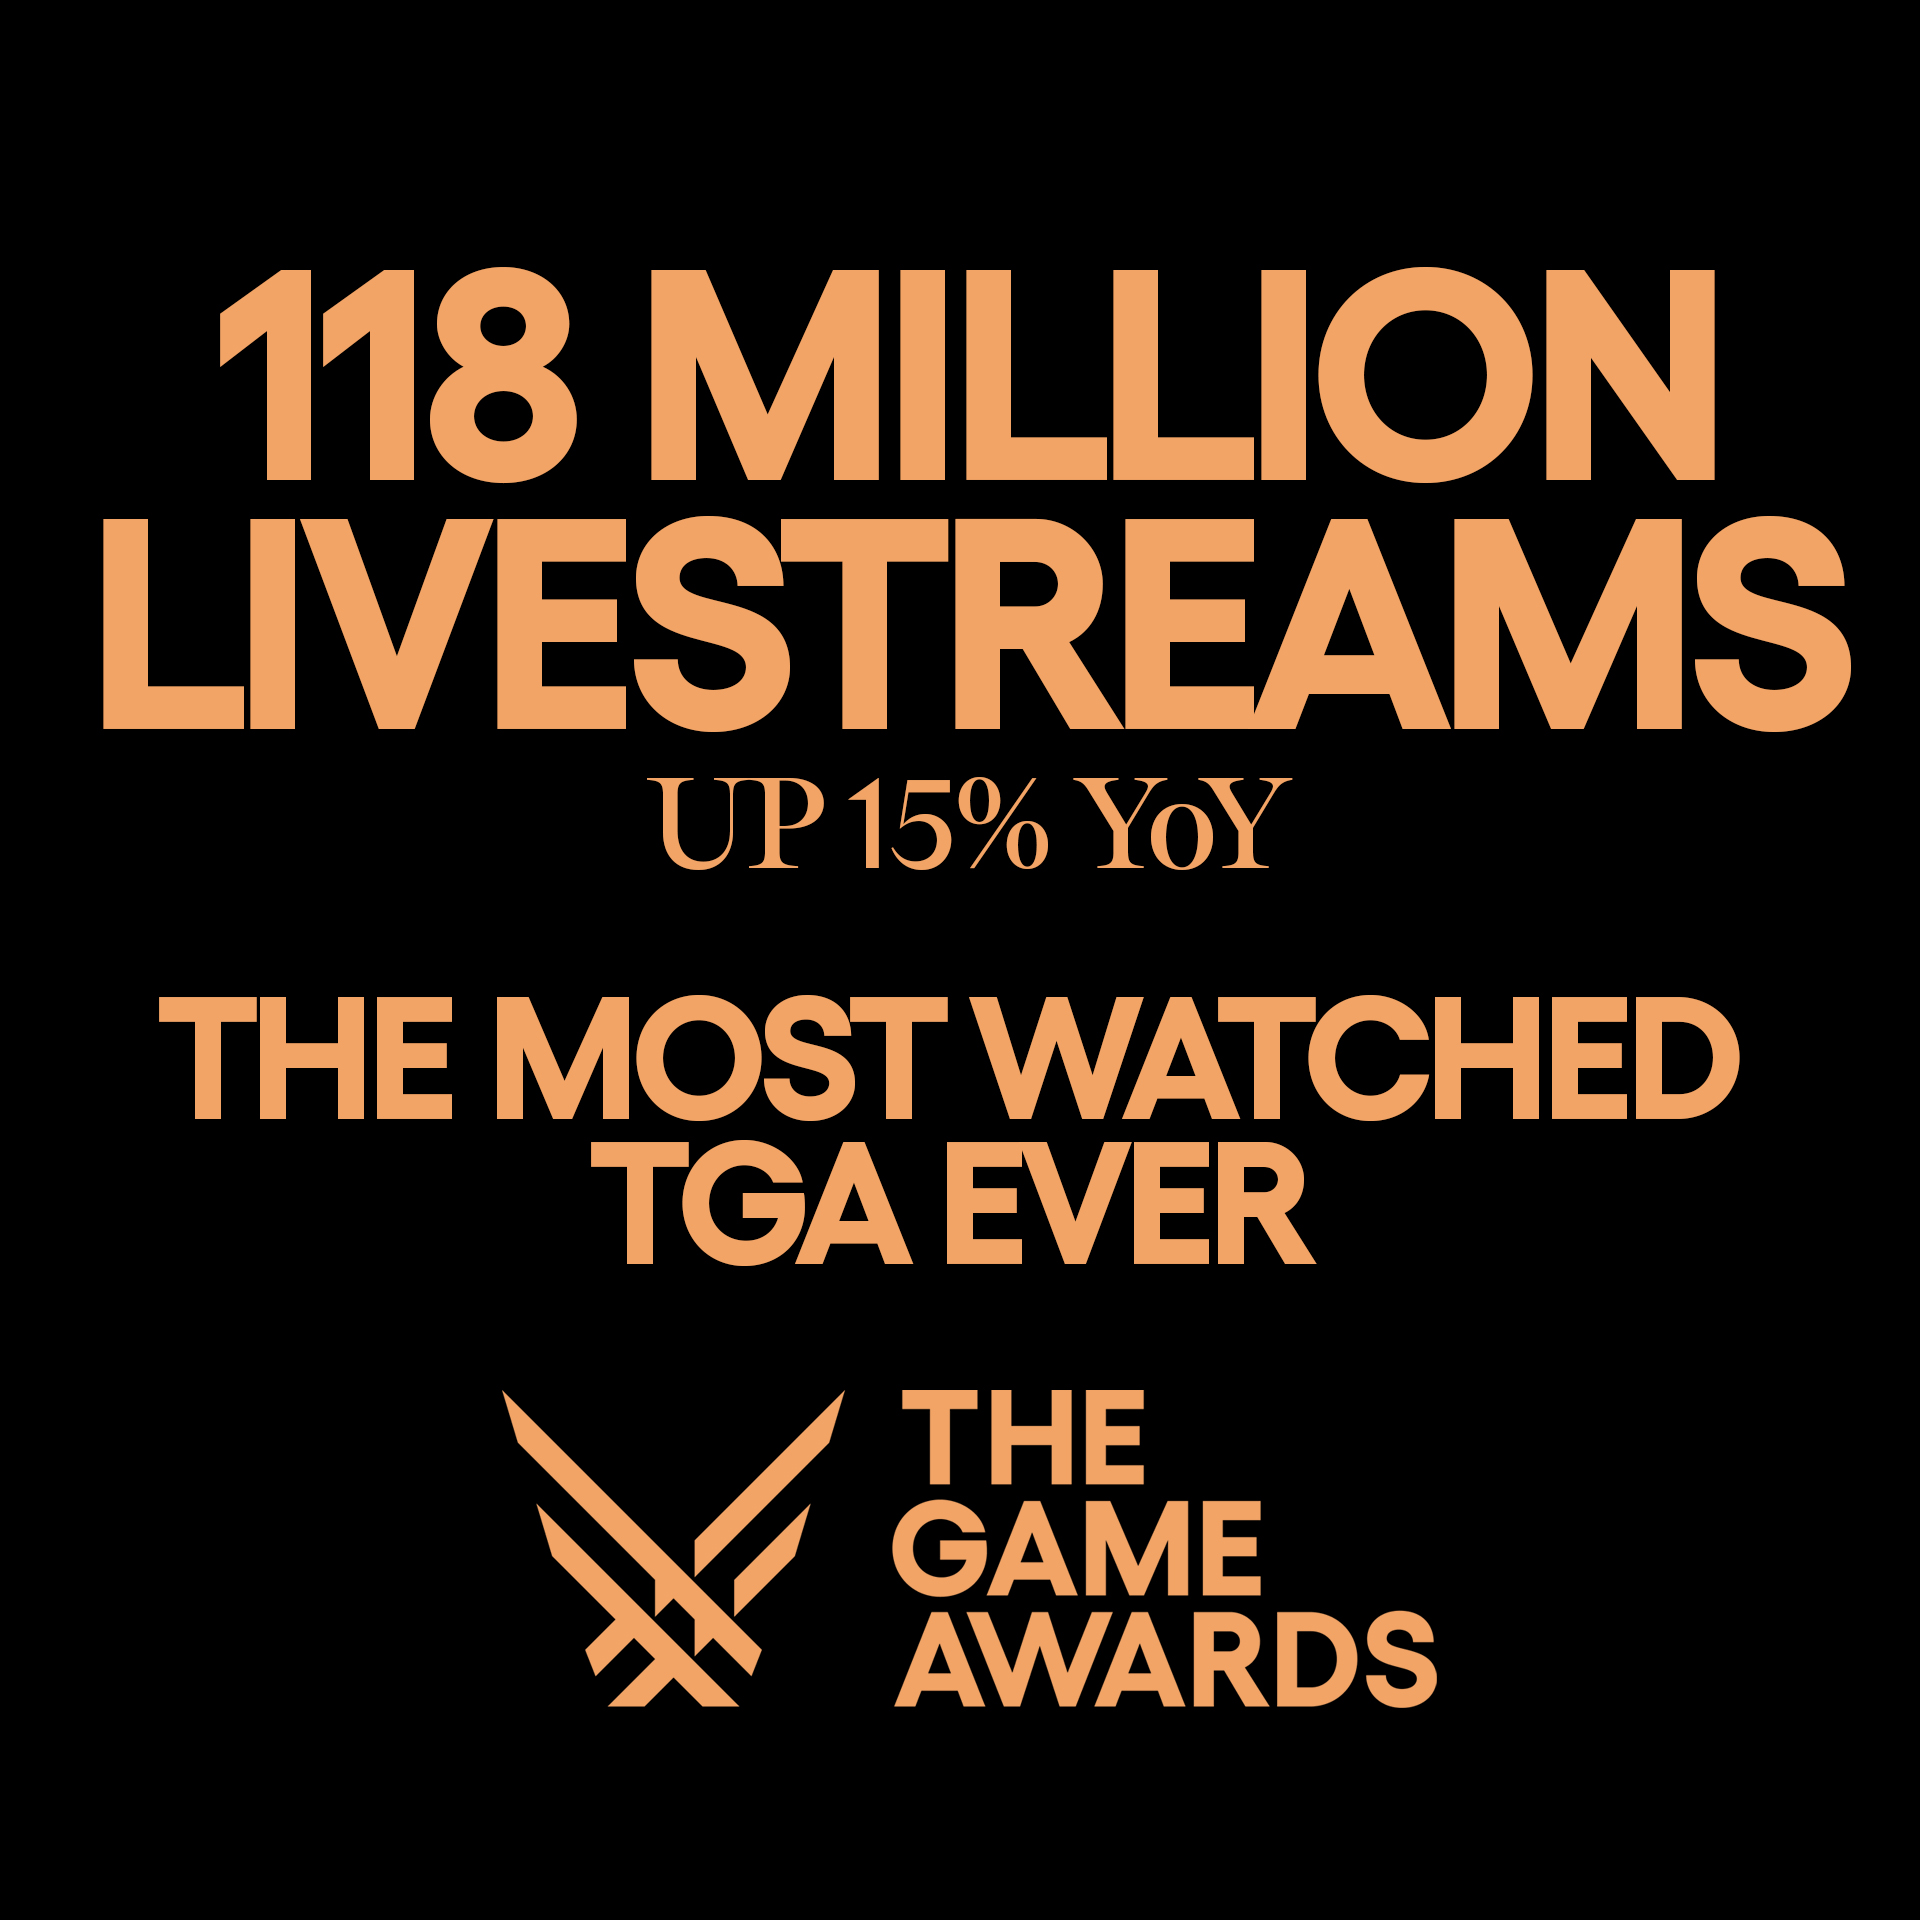 The Game Awards 2019 Viewership Increased 73% From Last Year - mxdwn Games